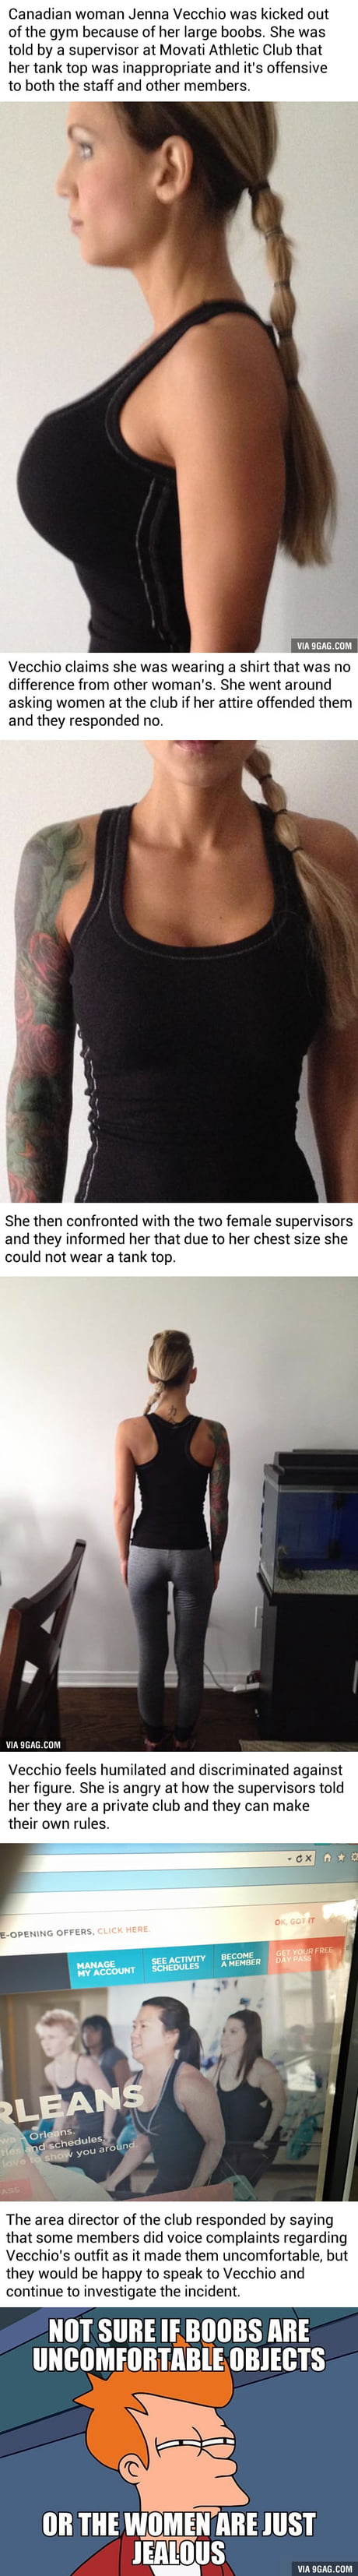 Woman got kicked out of gym because her boobs are too big - 9GAG